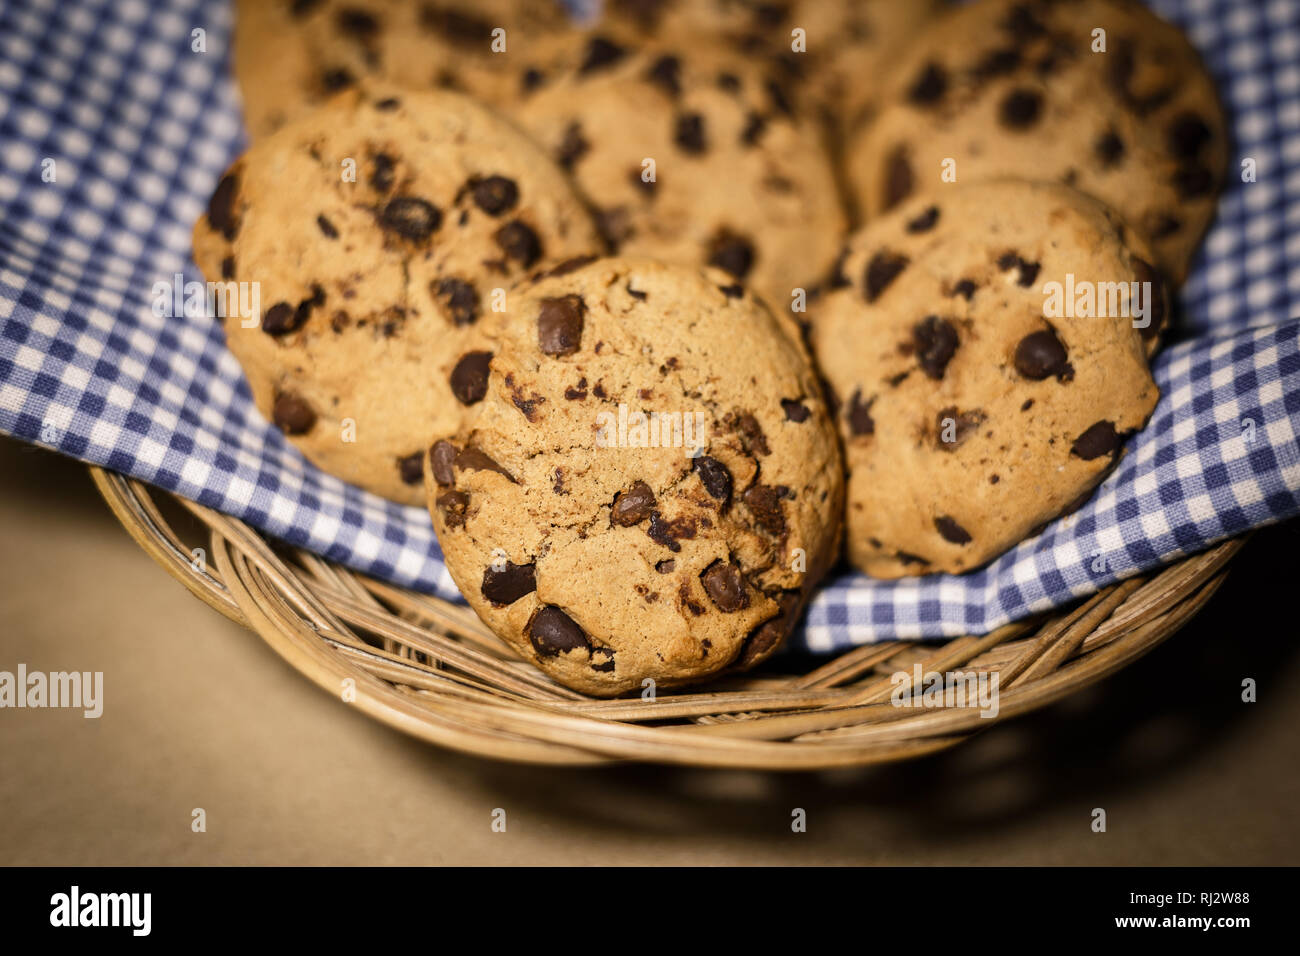 Chocolate chips cookies in a wooden basket . Food photography theme in vintage or retro color style. Stock Photo